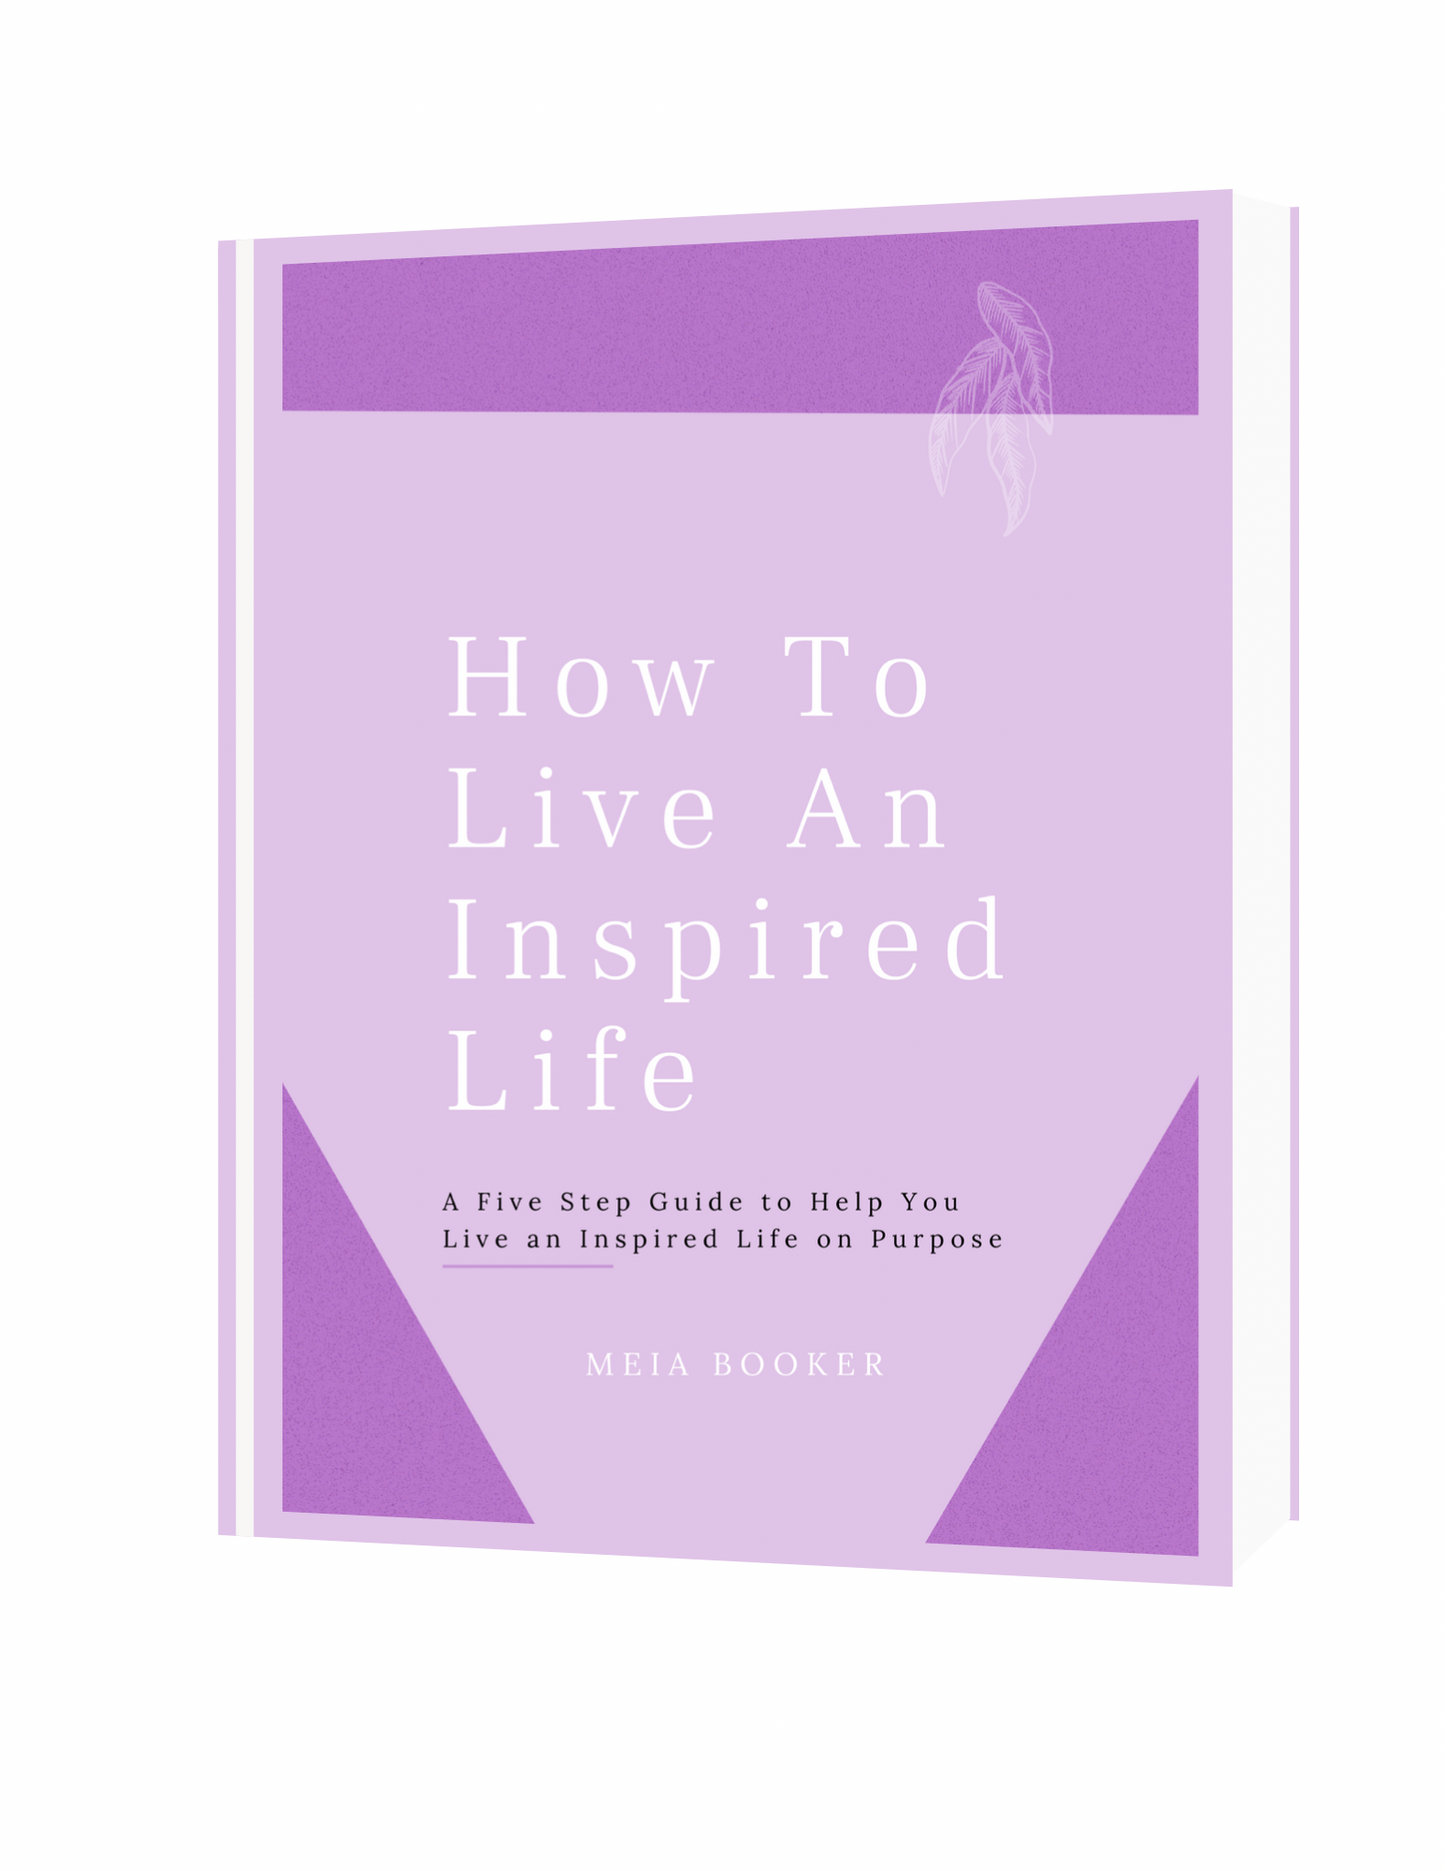 How to Live an Inspired Life